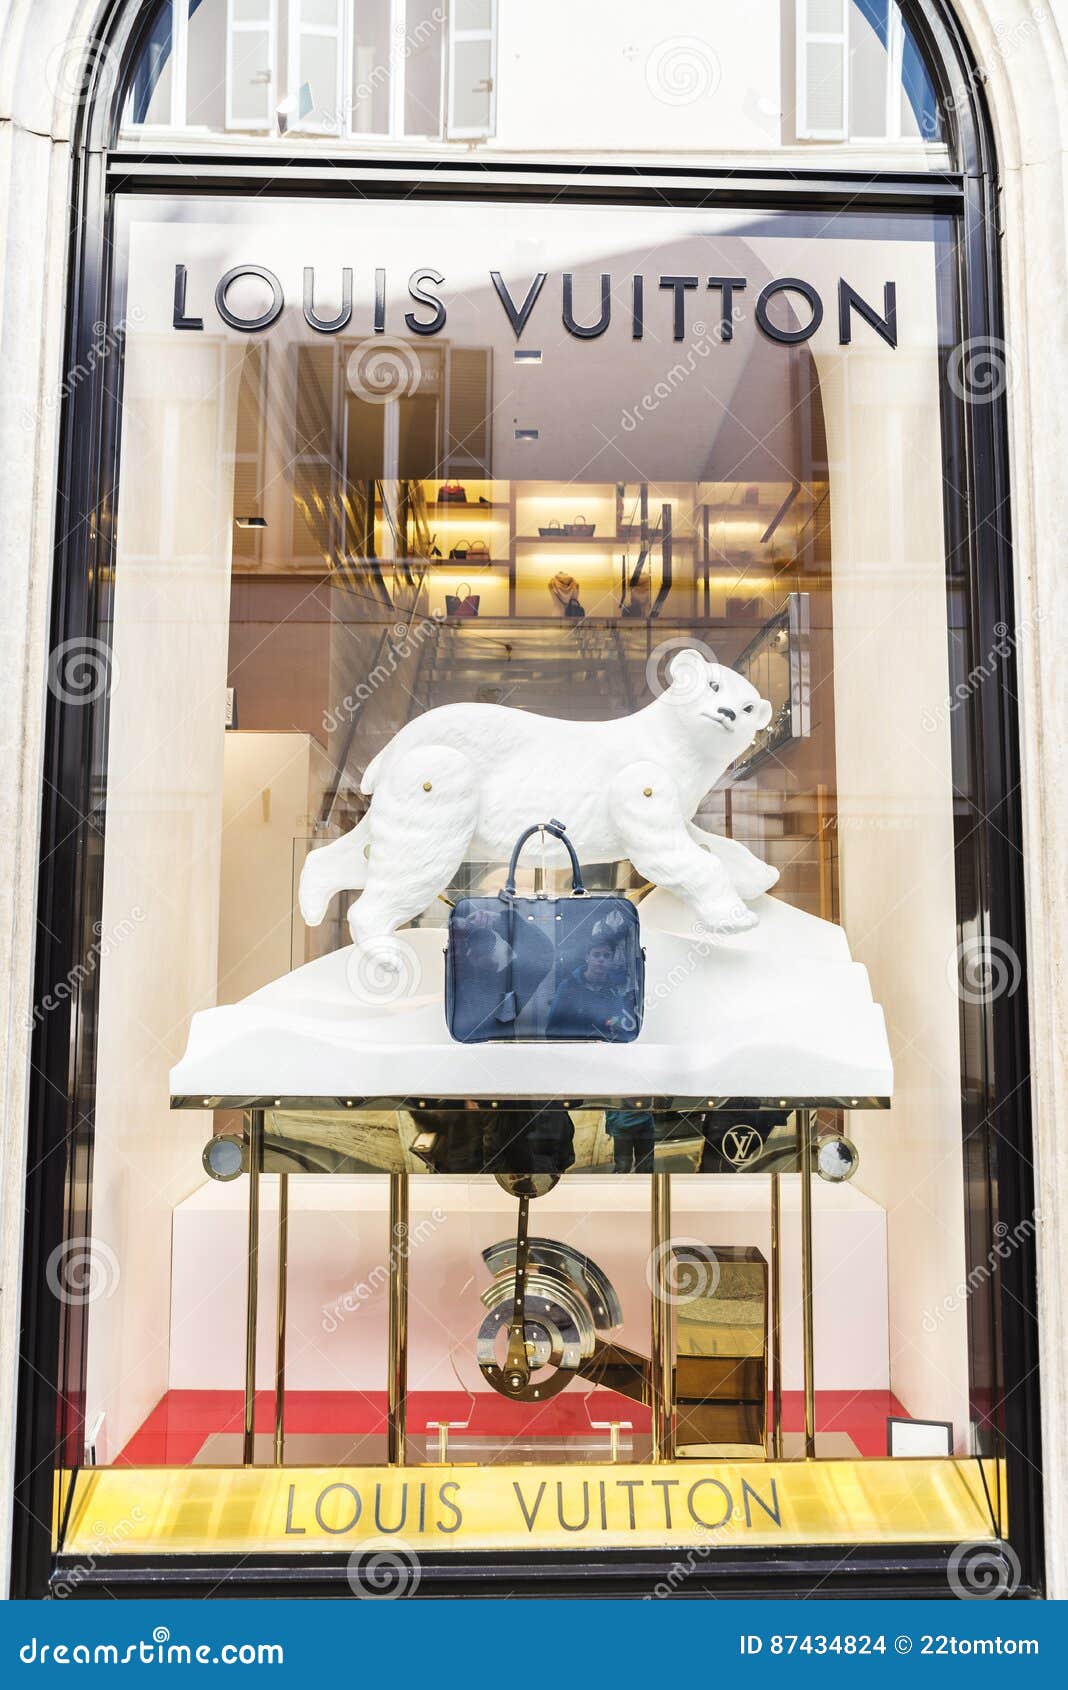 Louis Vuitton Rome Italy Locations